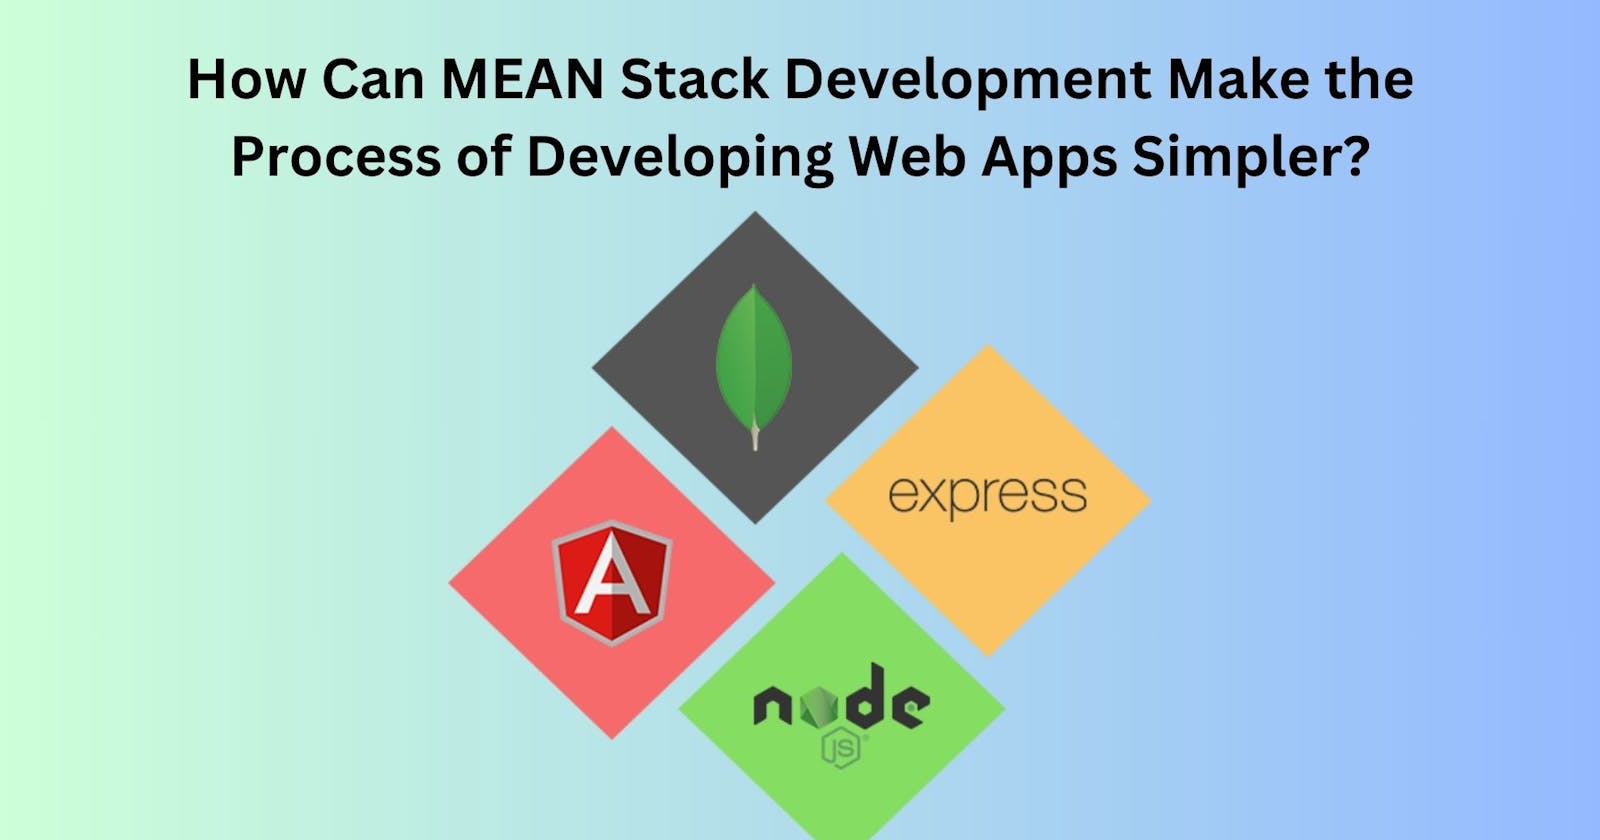 How Can MEAN Stack Development Make the Process of Developing Web Apps Simpler?